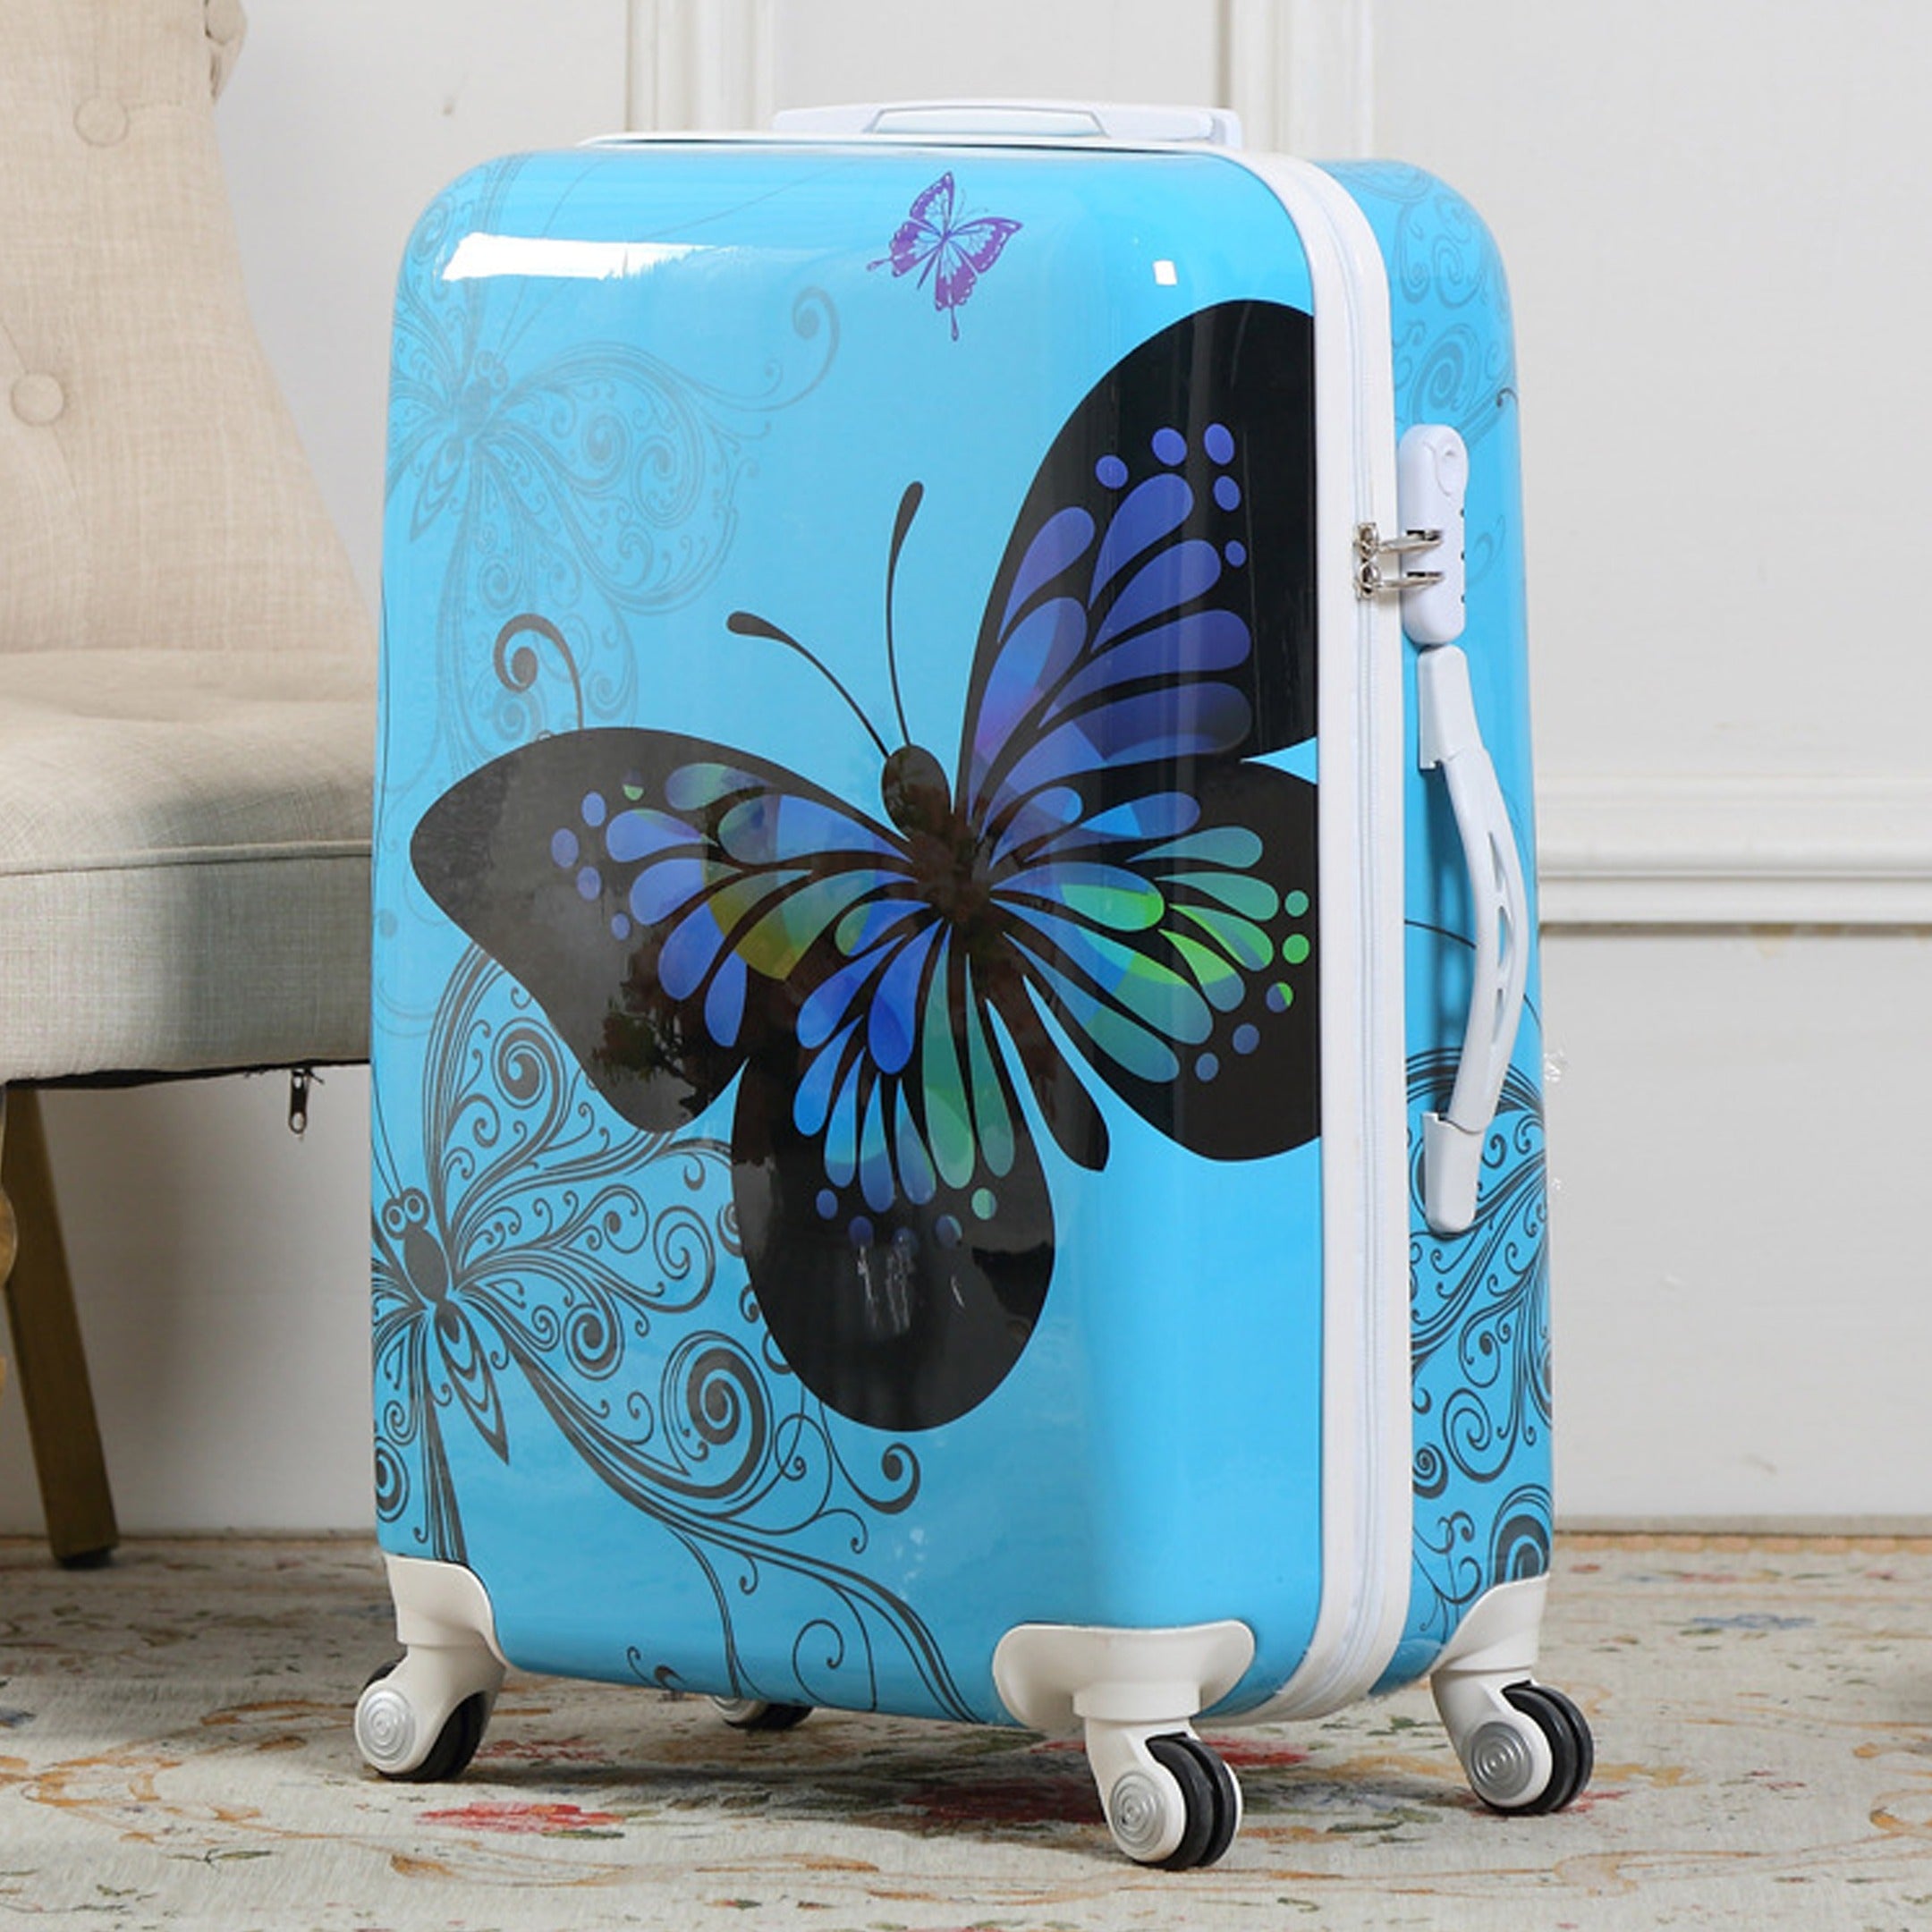 3 Pcs Set 20" 24" 28 Inches Printed Butterfly Blue Lightweight Luggage | Hard Case Trolley Bag